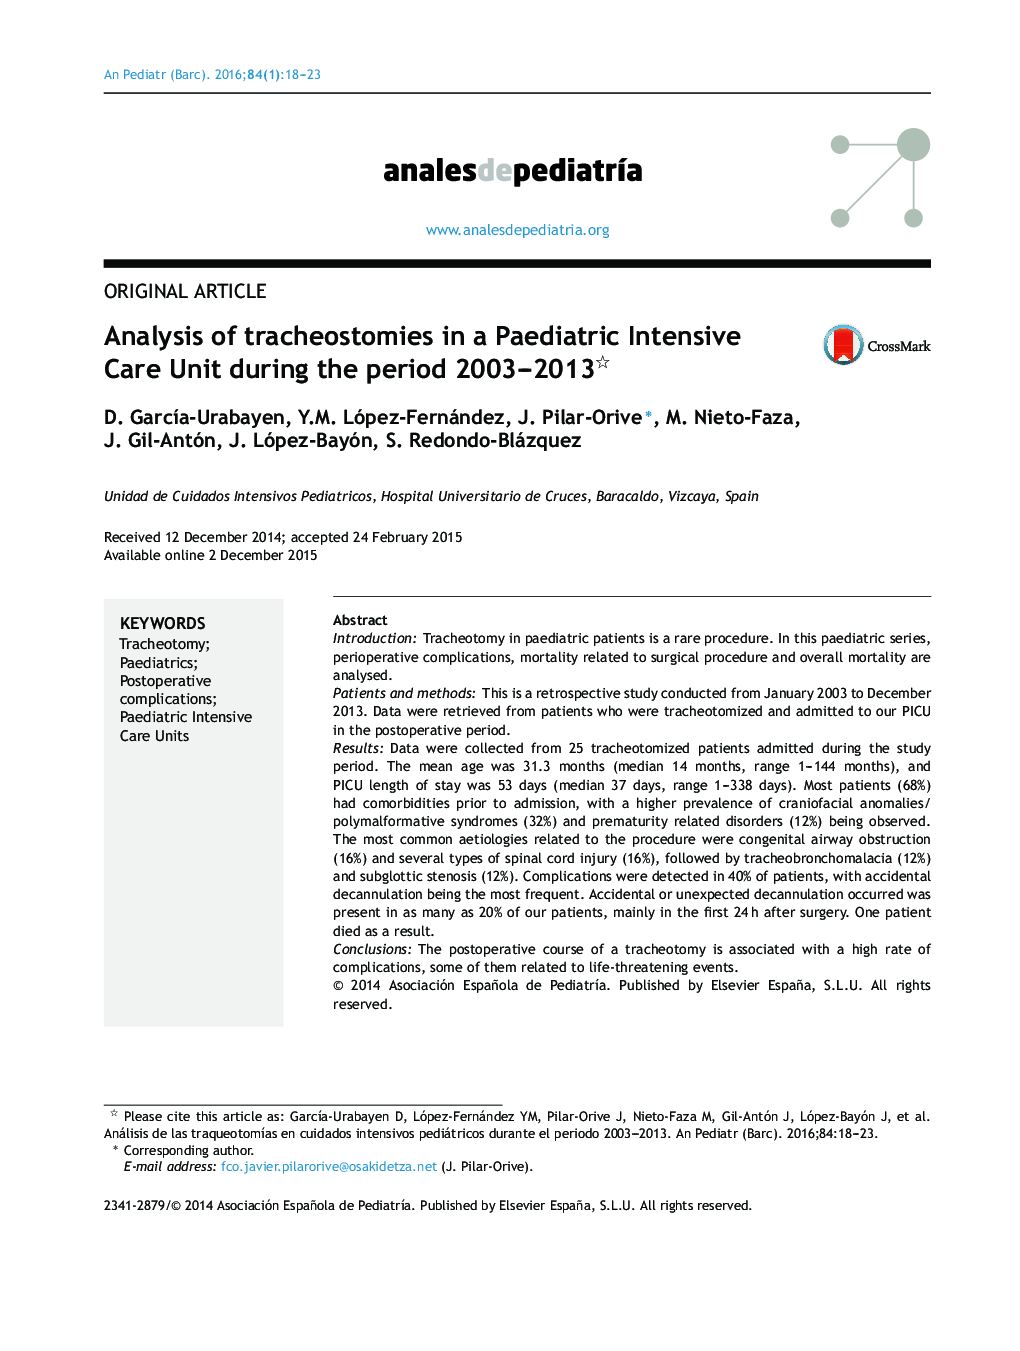 Analysis of tracheostomies in a Paediatric Intensive Care Unit during the period 2003–2013 